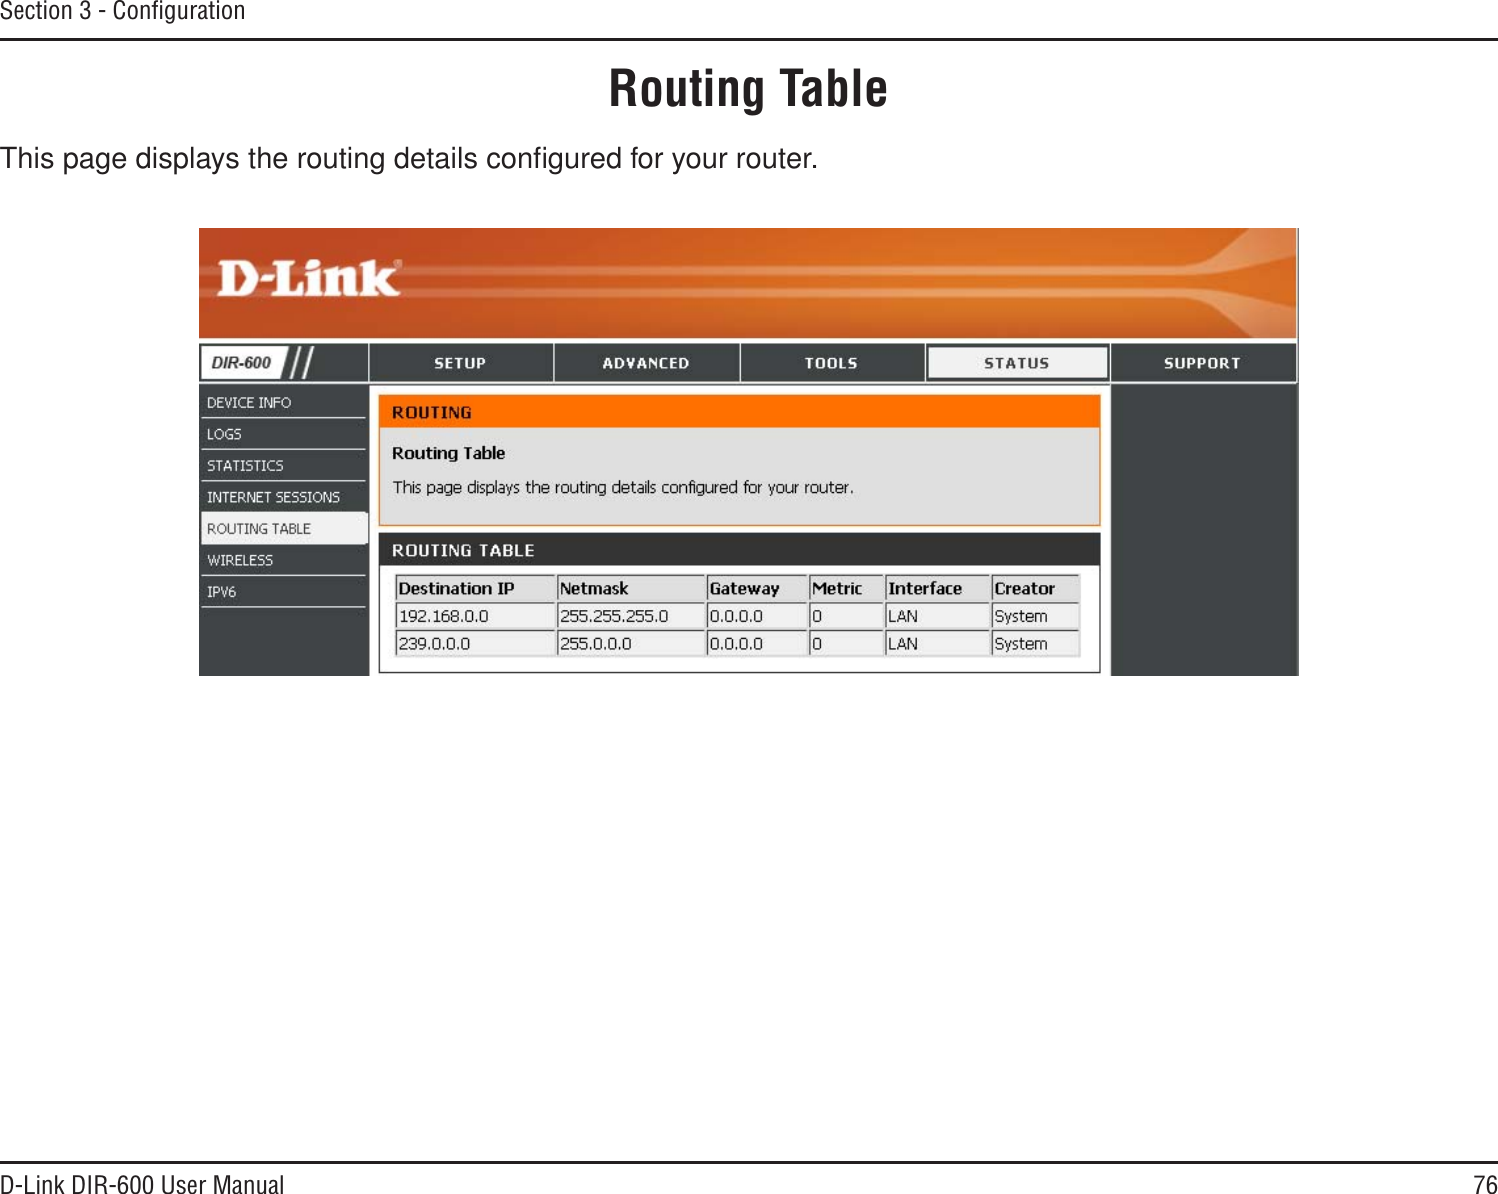 76D-Link DIR-600 User ManualSection 3 - ConﬁgurationThis page displays the routing details conﬁgured for your router.Routing Table